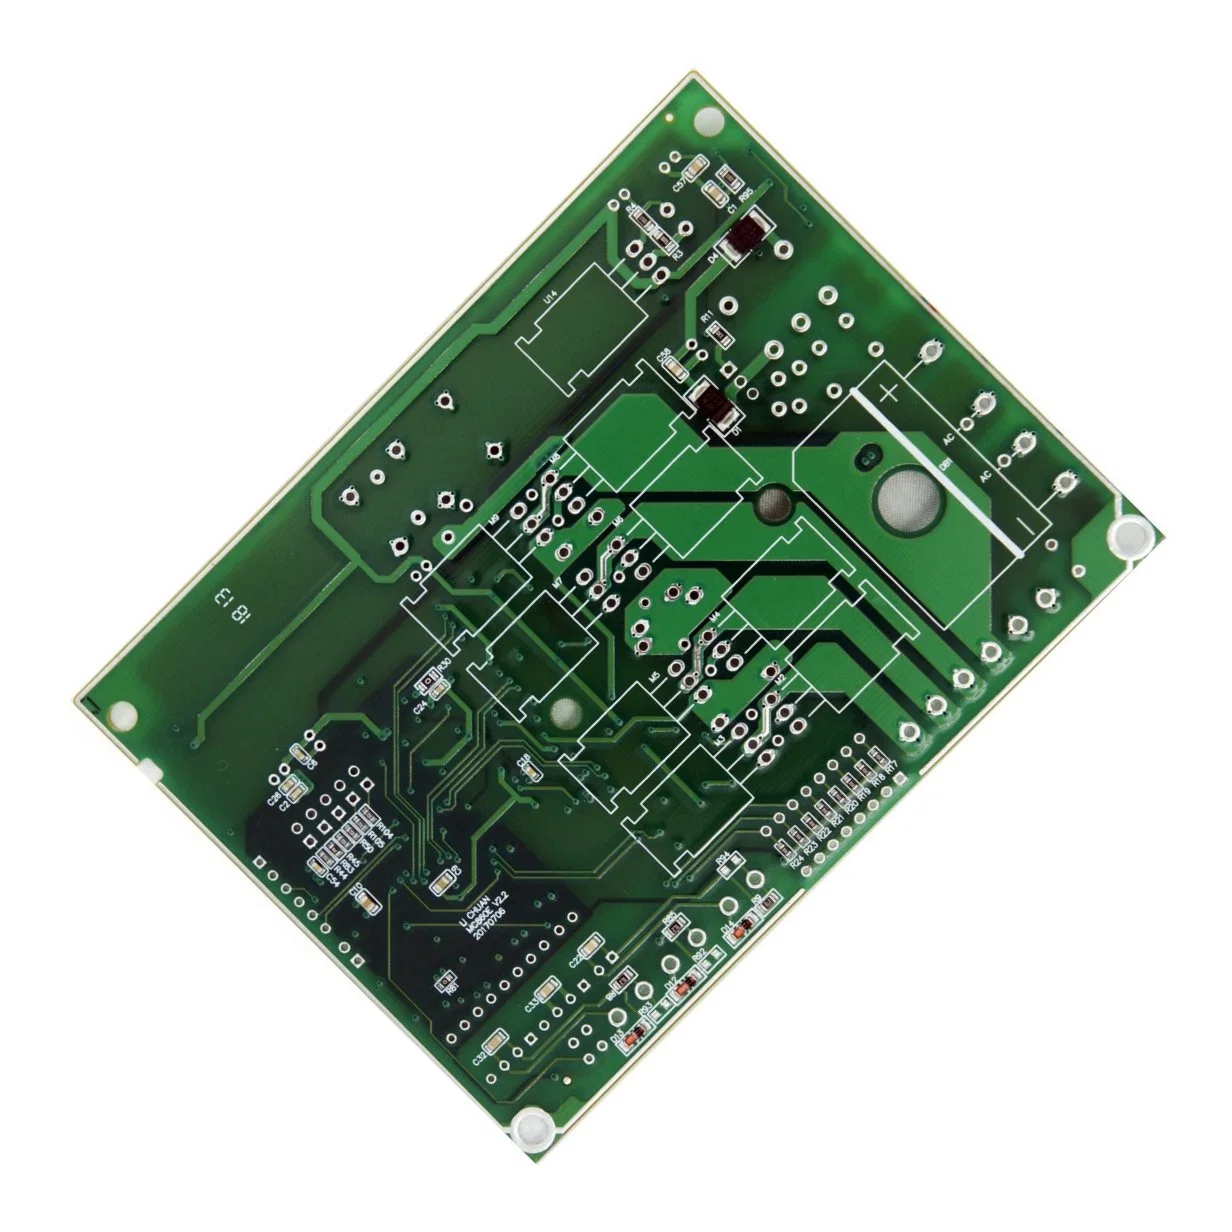 OEM PCB Board Manufacture PCB Design Service Needs to Provide Design Documents for Gerber File Required PCB Assembly